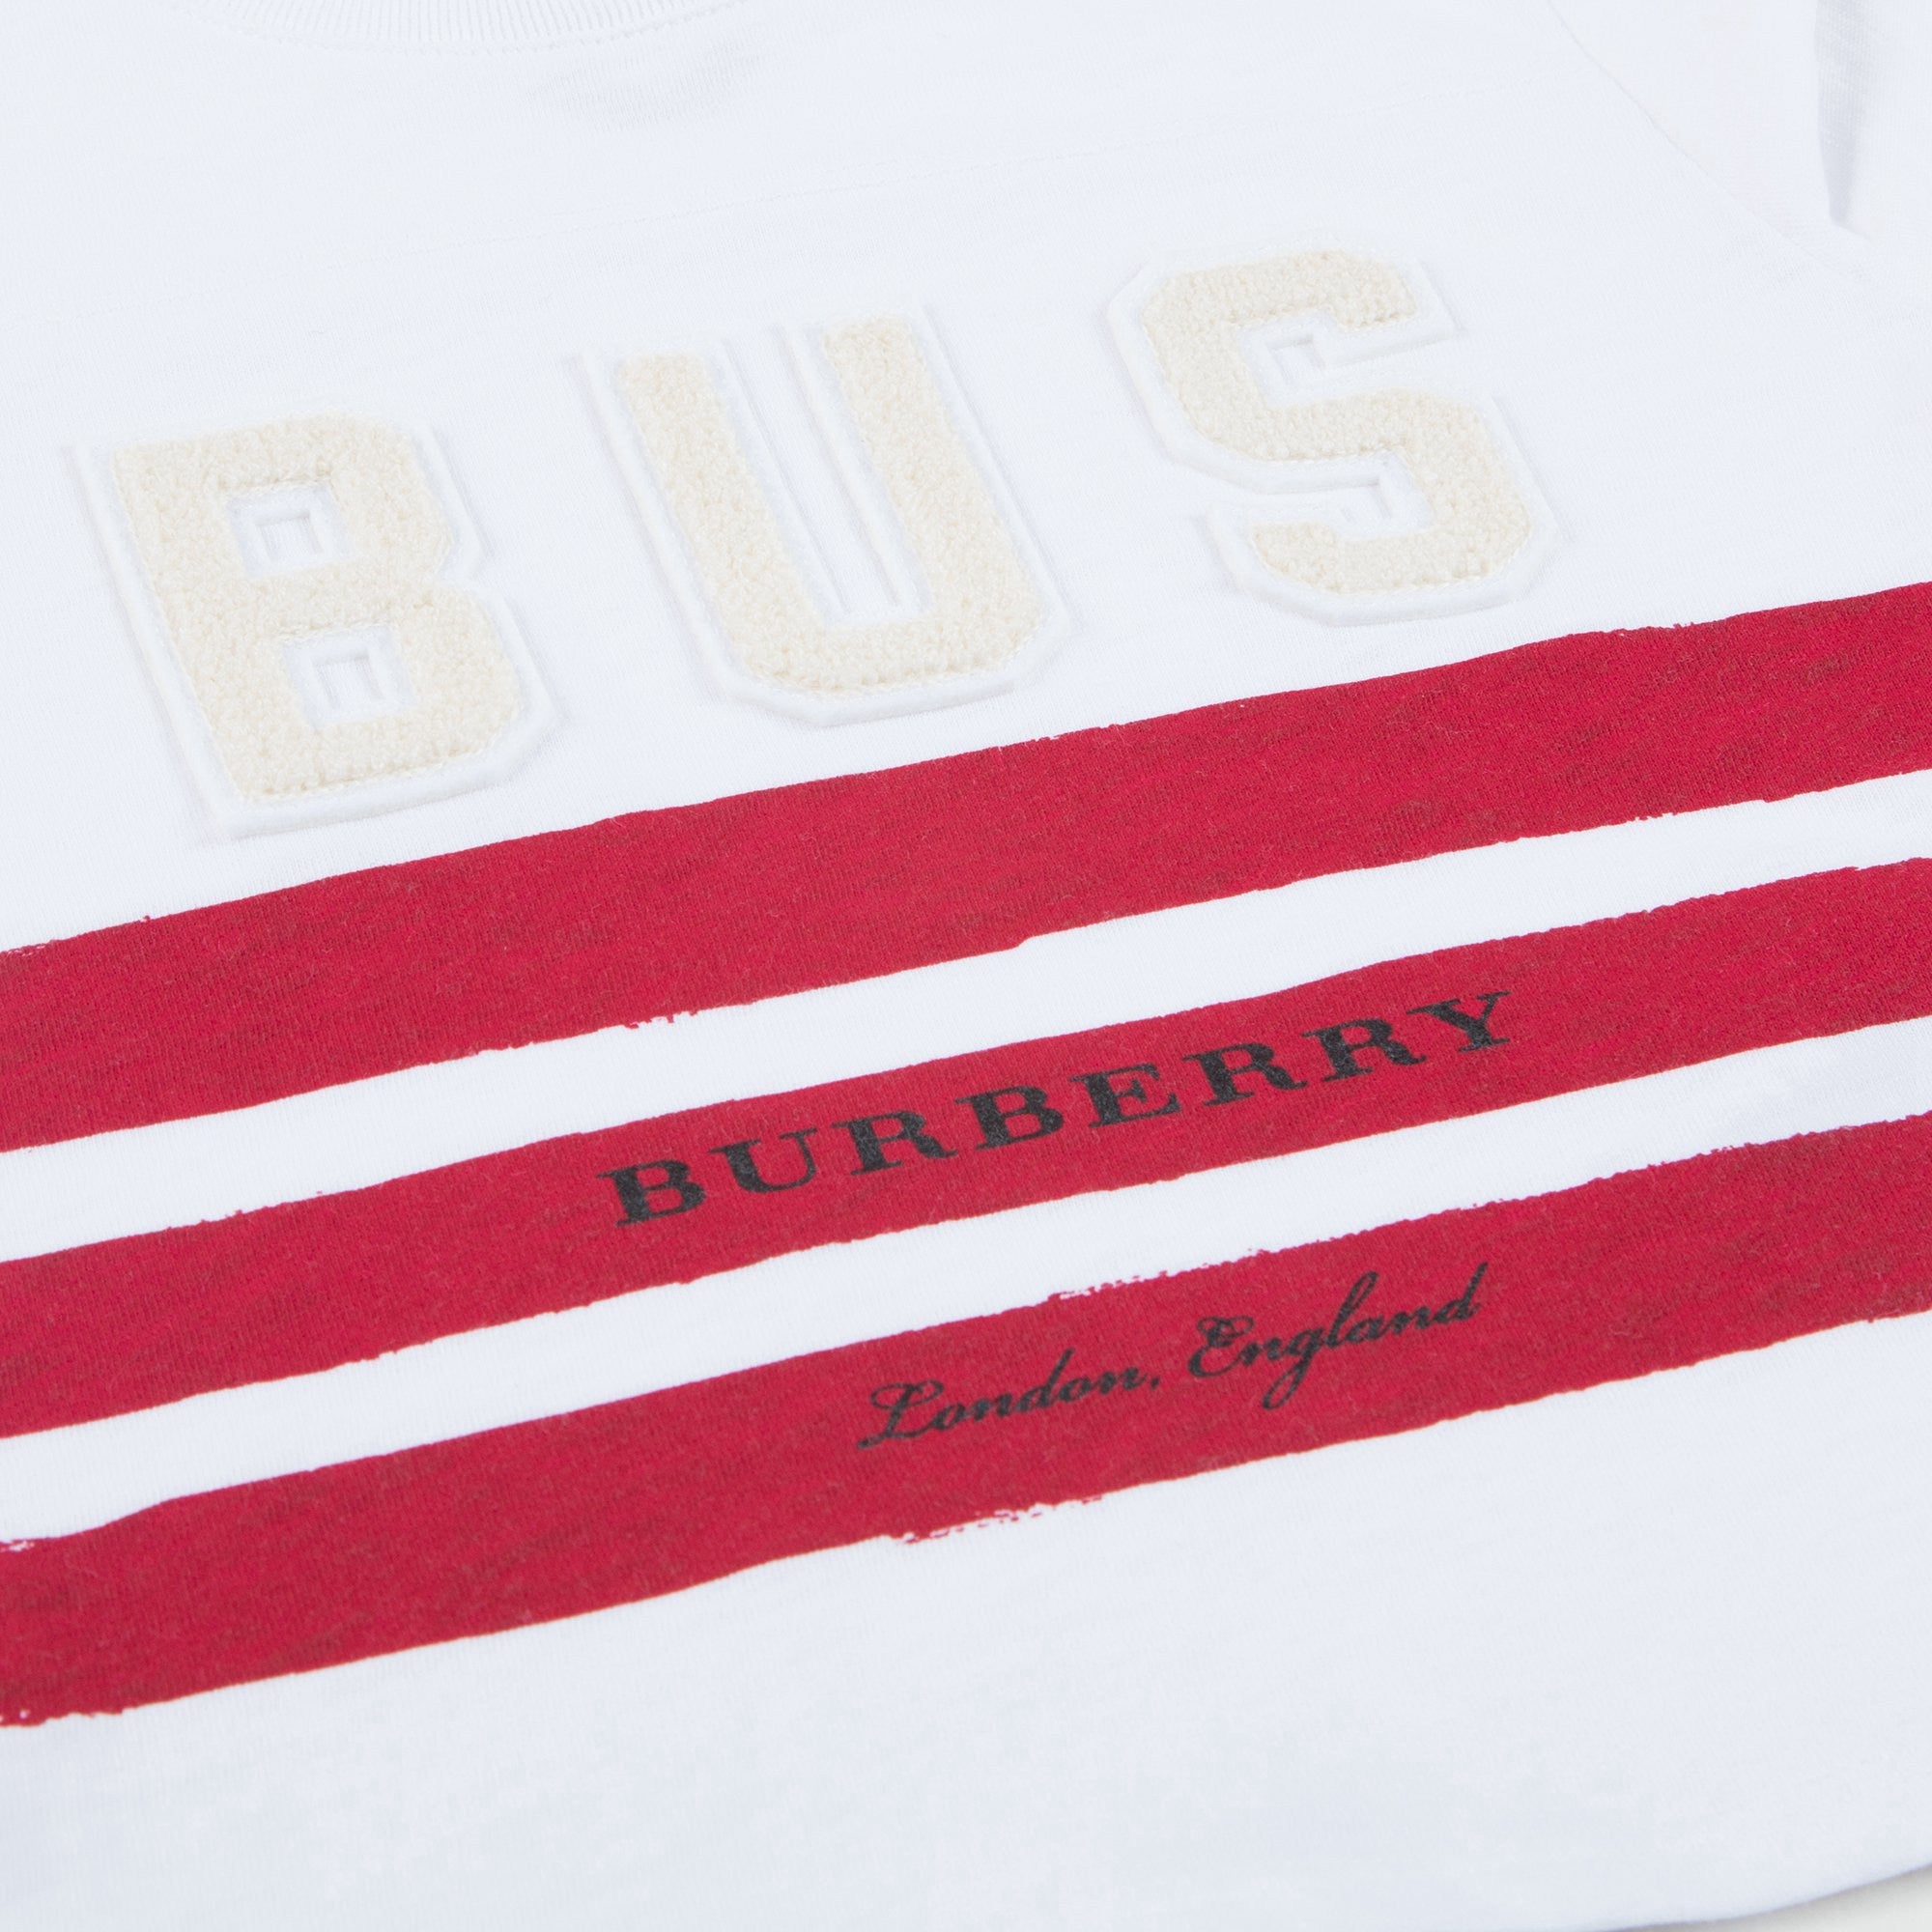 Baby  White  &  Red   Striped   Cotton   T-shirt